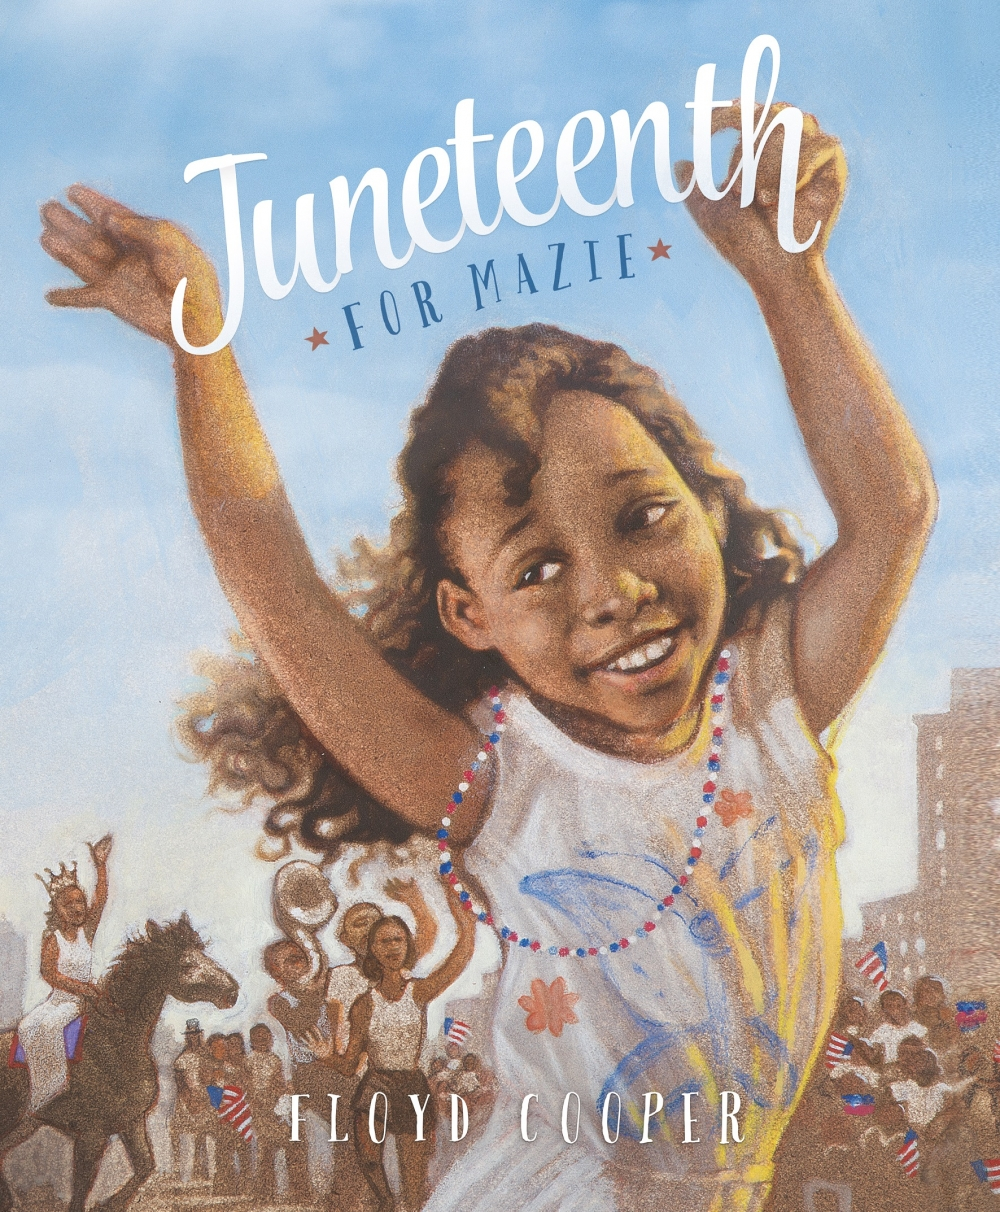 book review on juneteenth